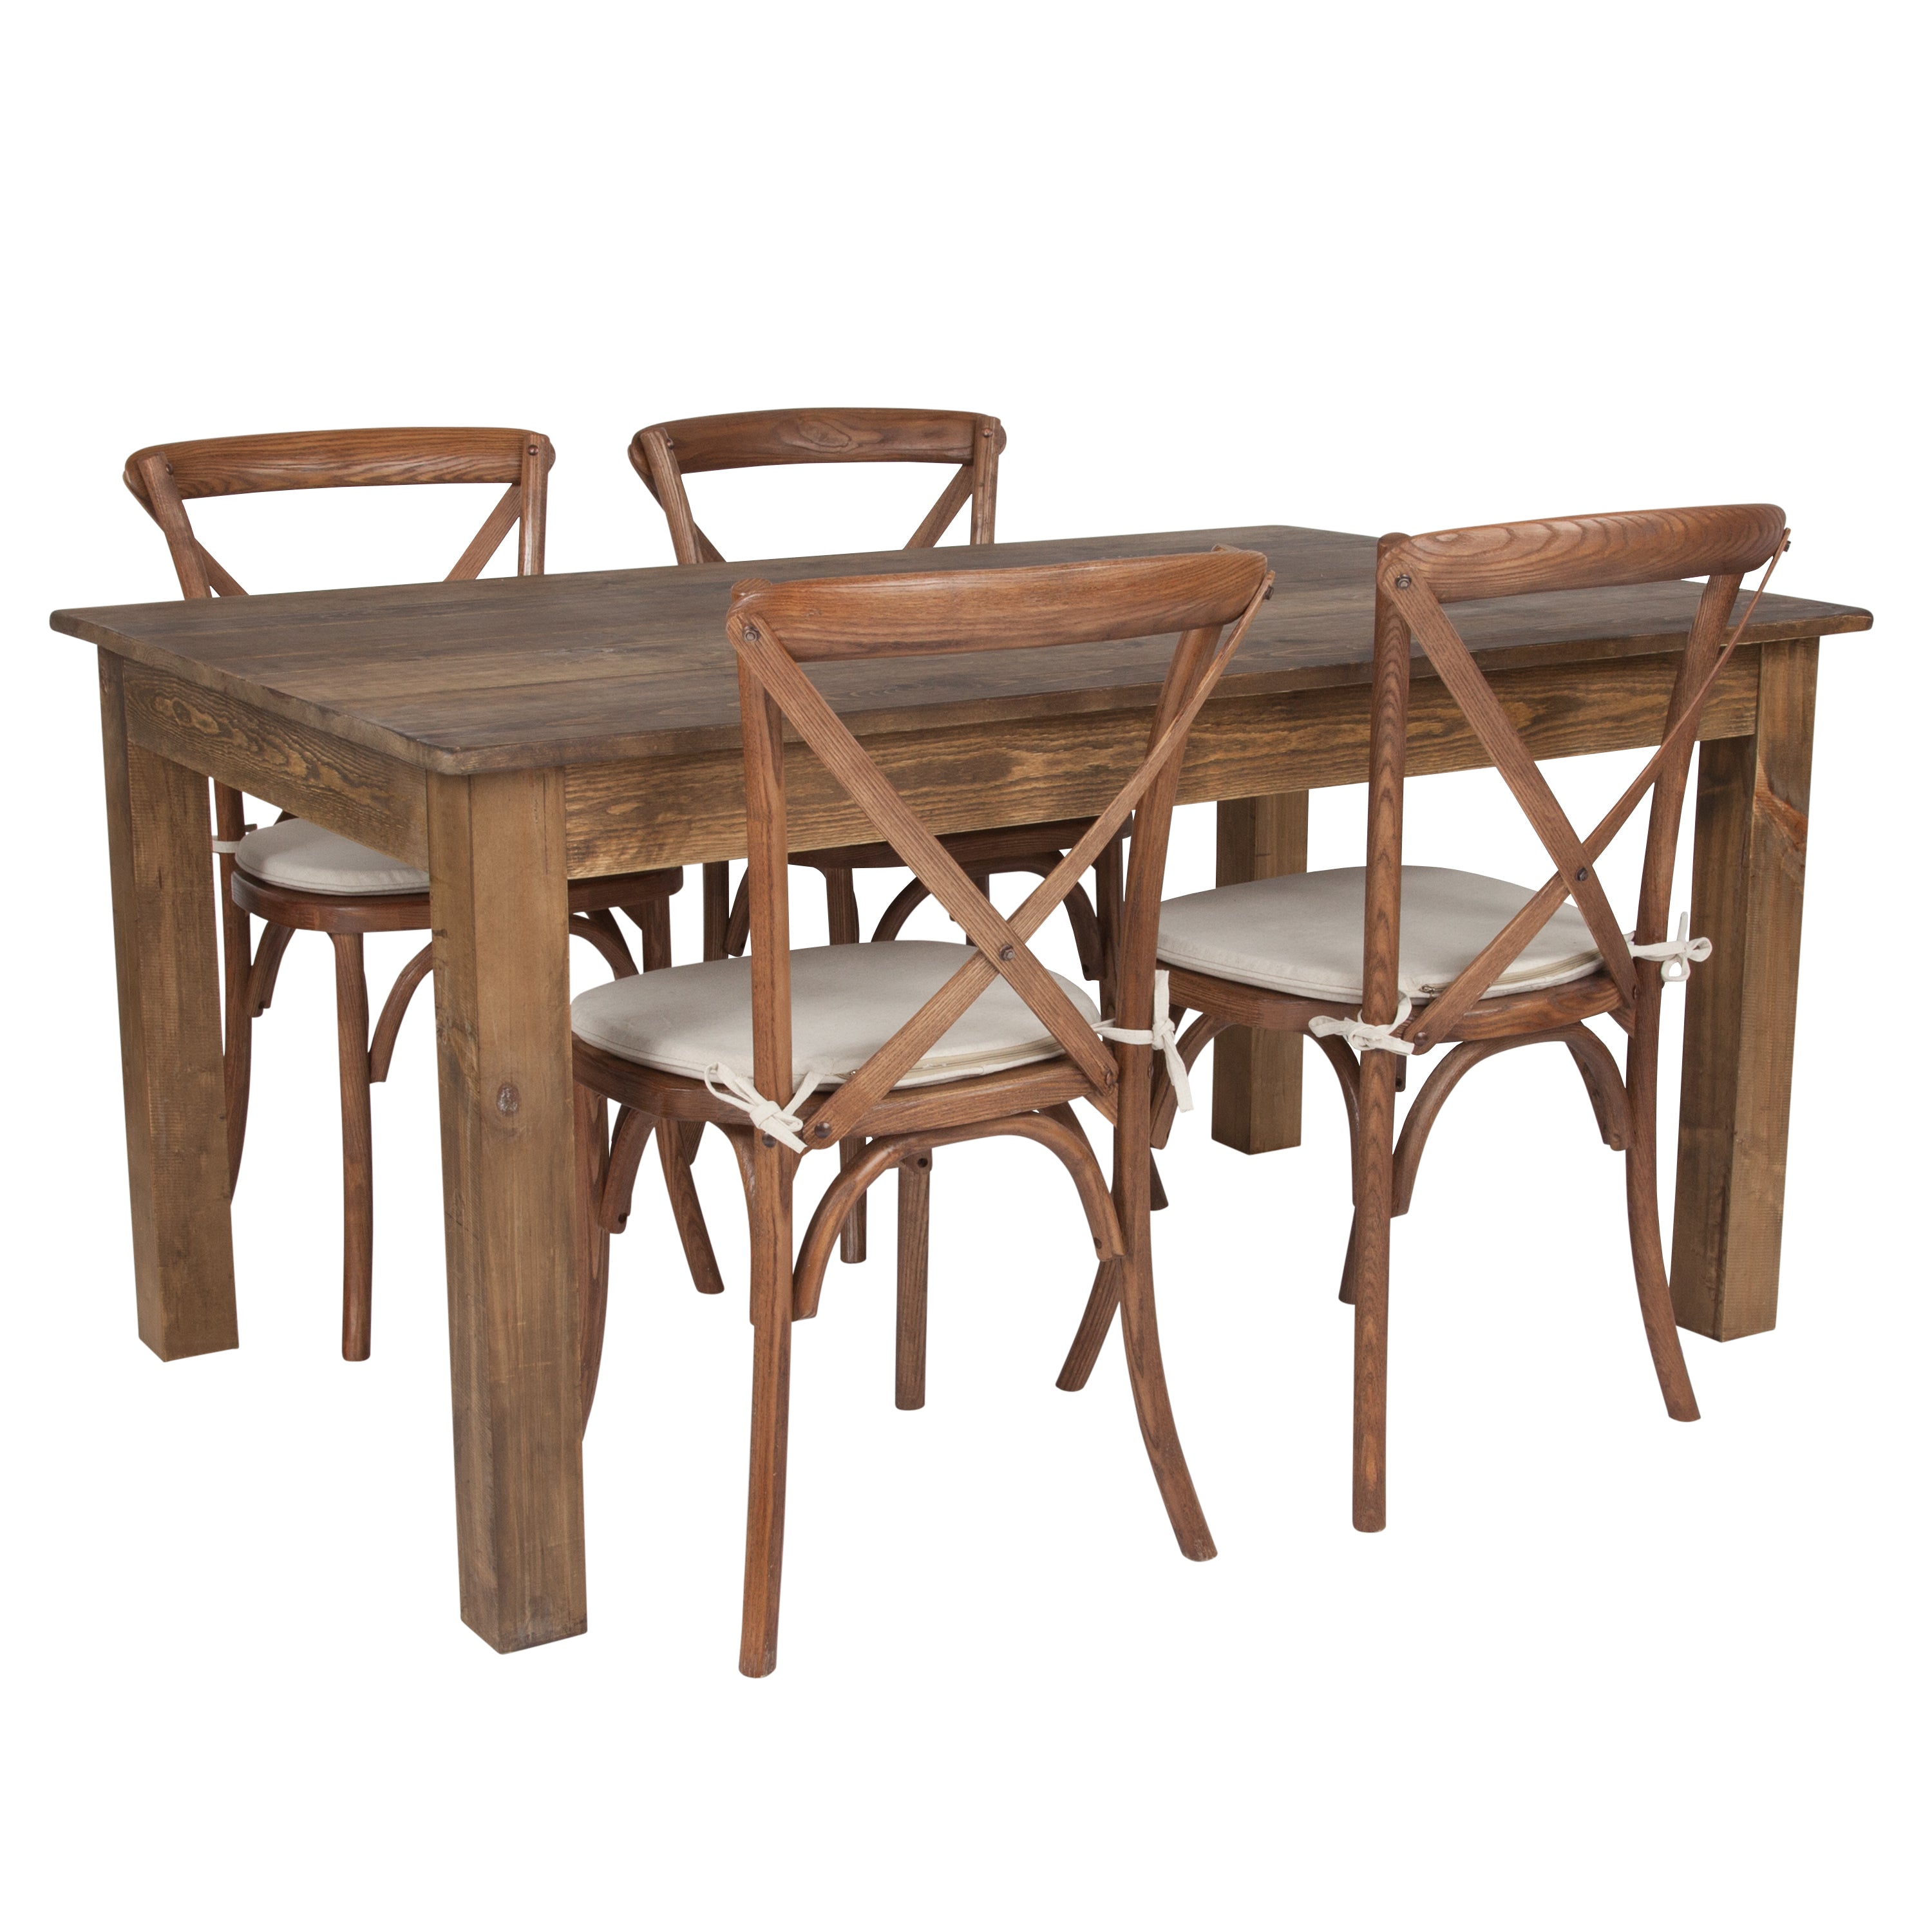 60" x 38" Farm Table Set with 4 Cross Back Chairs and Cushions-Dining Room Set-Flash Furniture-Wall2Wall Furnishings